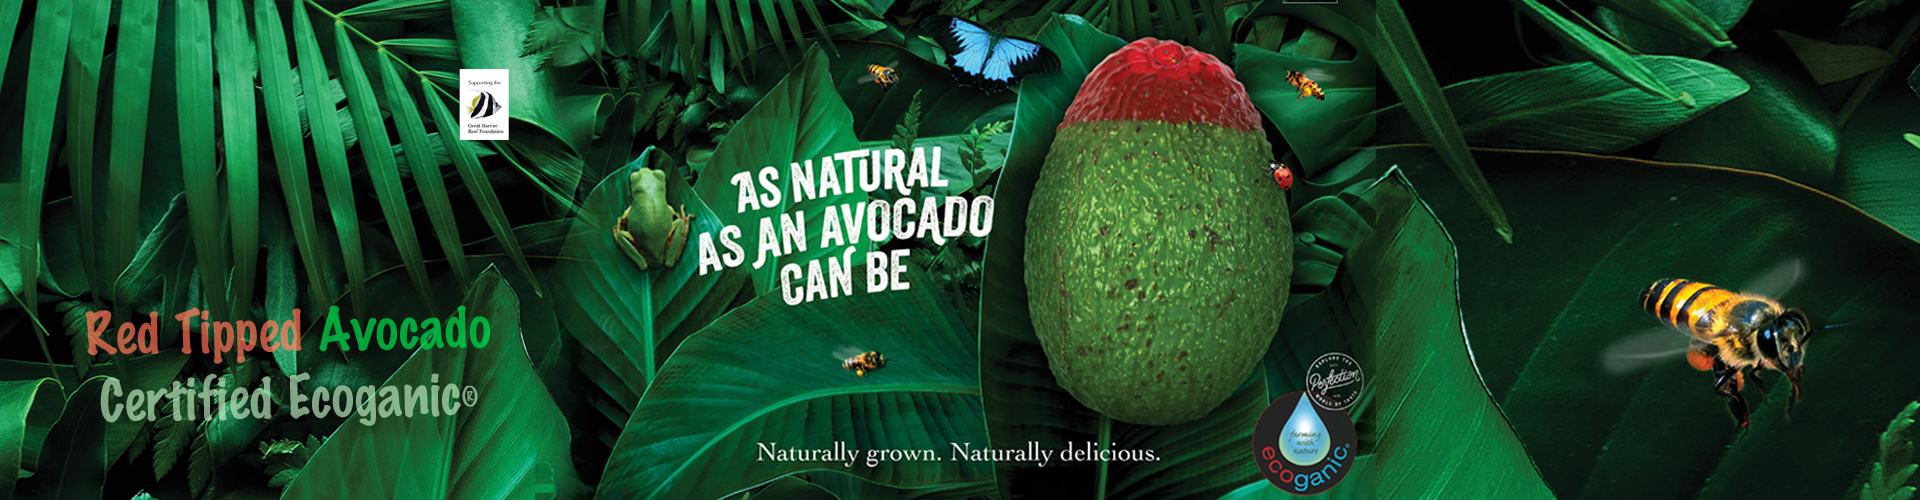 Red Tipped Avocado - Ecoganic Certified